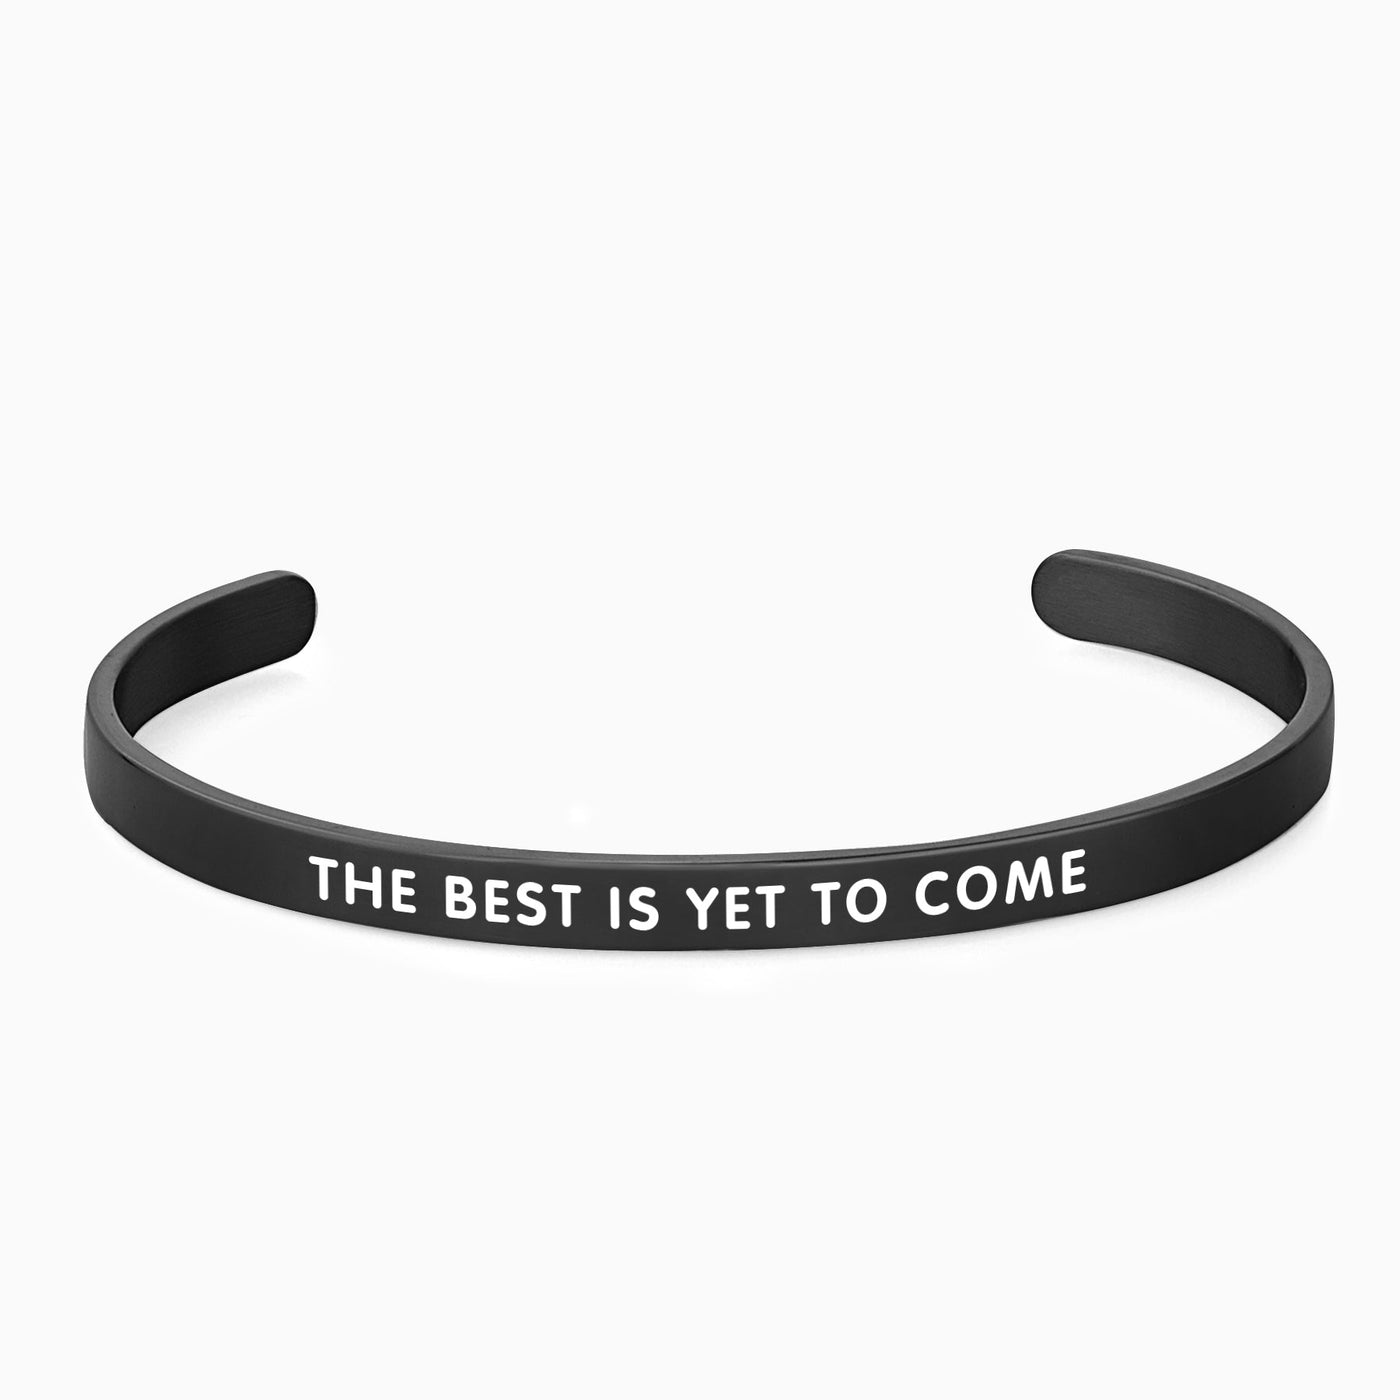 THE BEST IS YET TO COME - OTANTO